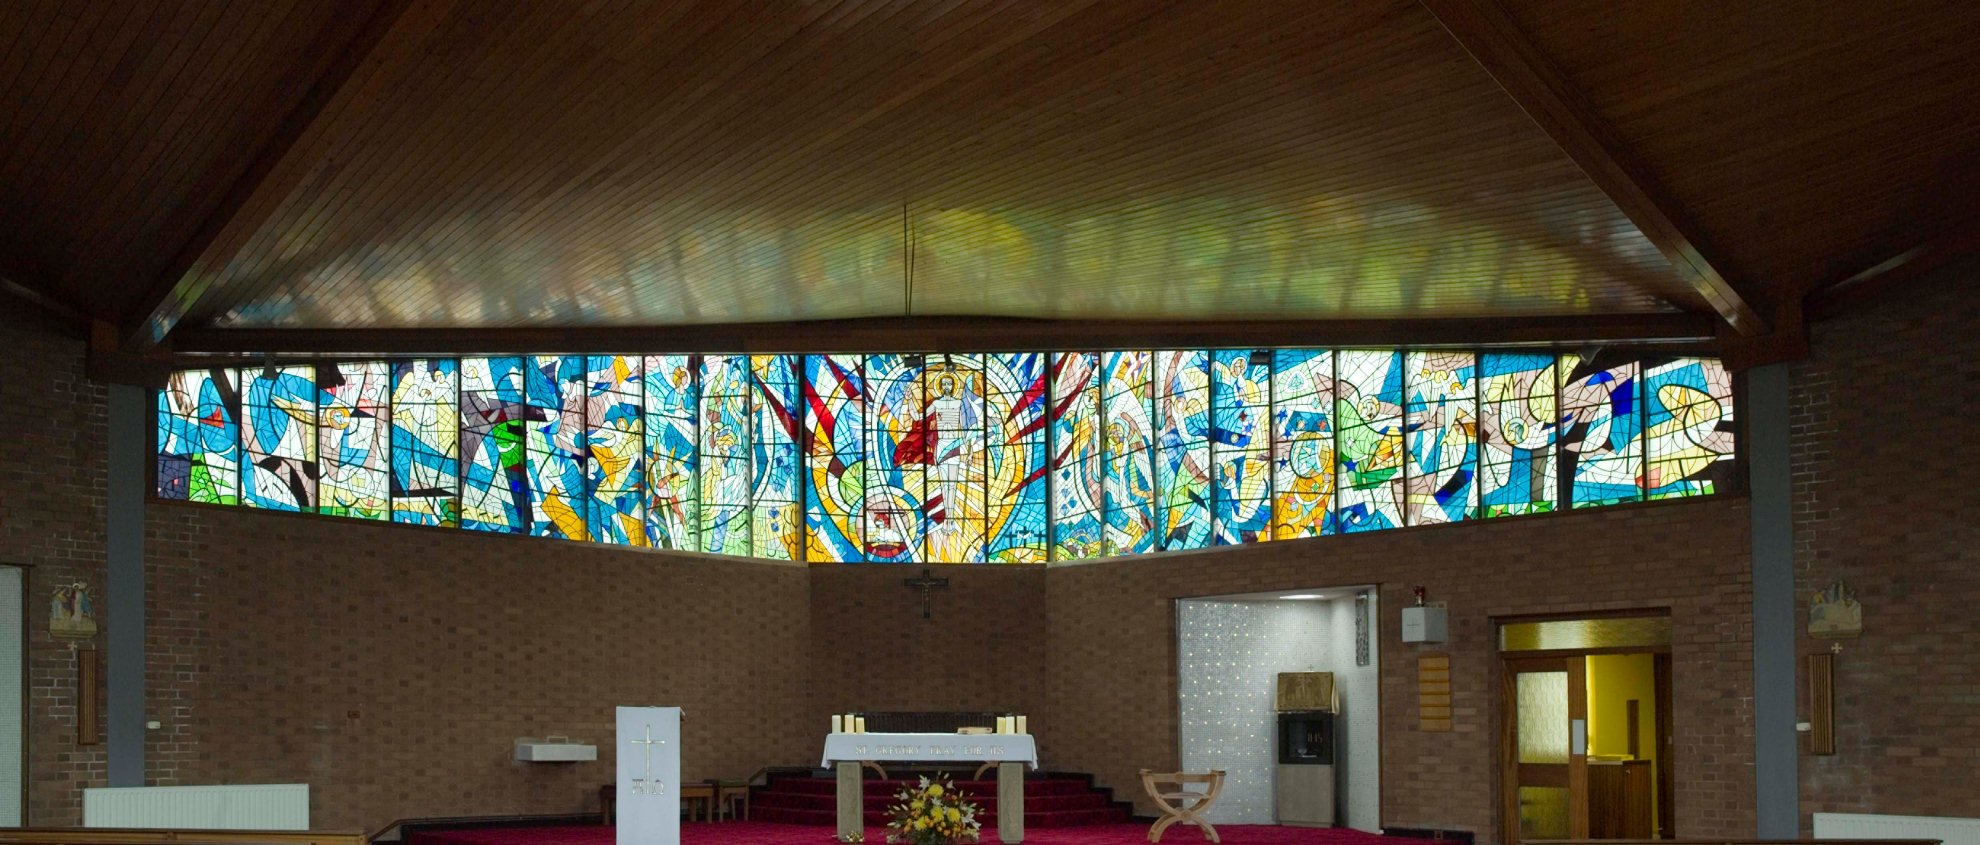 East stained-glass window and sanctuary of St Gregory the Great Roman Catholic church, Swarcliffe, Leeds